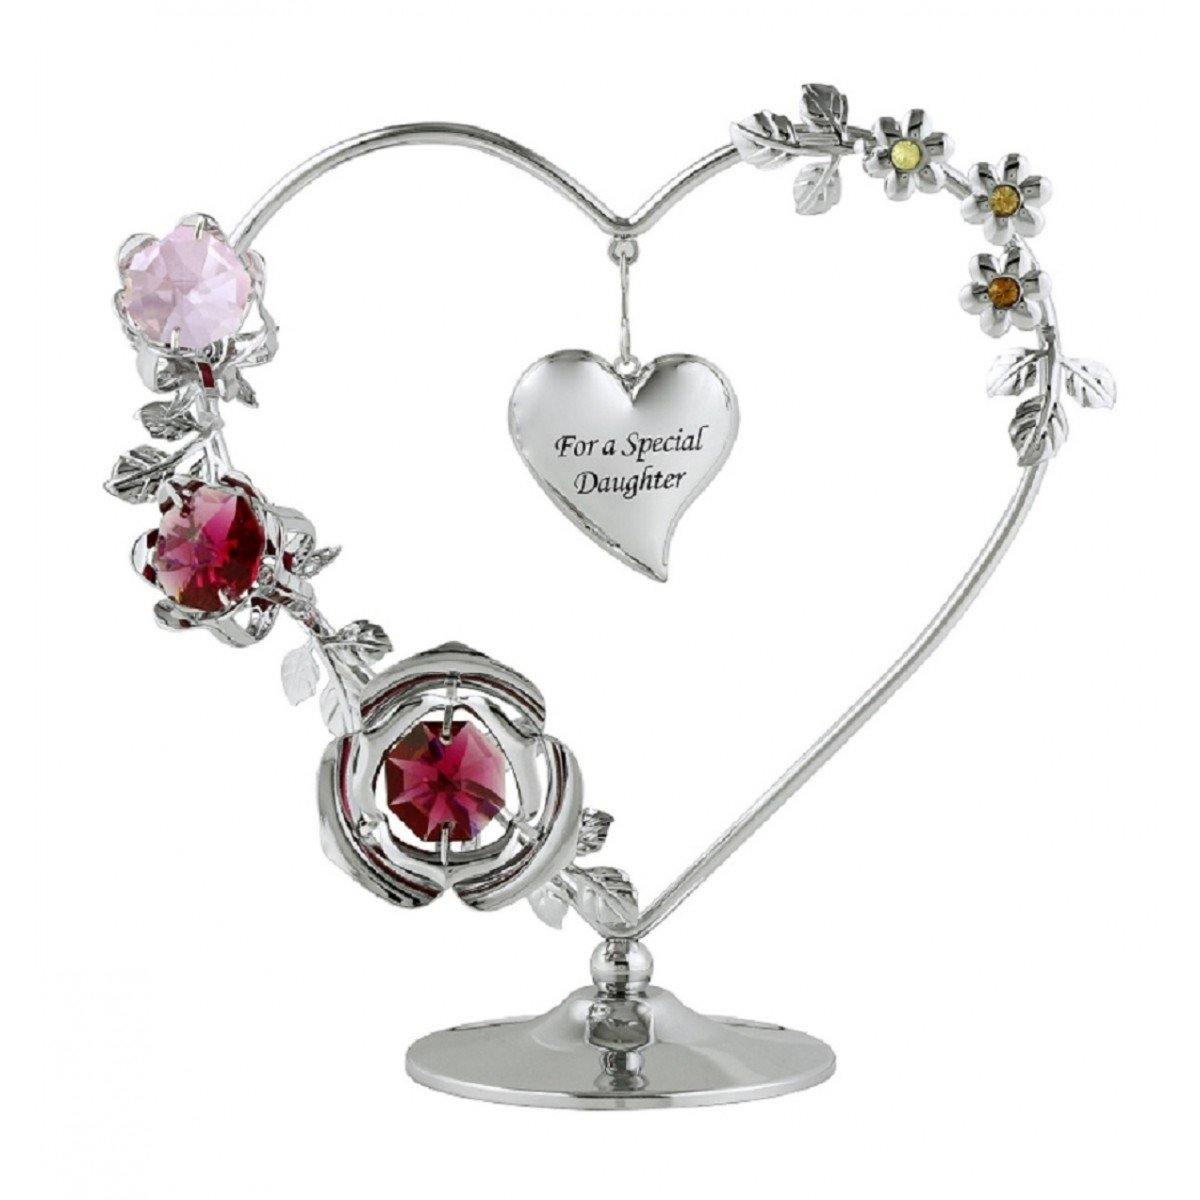 Special Daughter Heart Wreath (Crystal World) - Gallery Gifts Online 